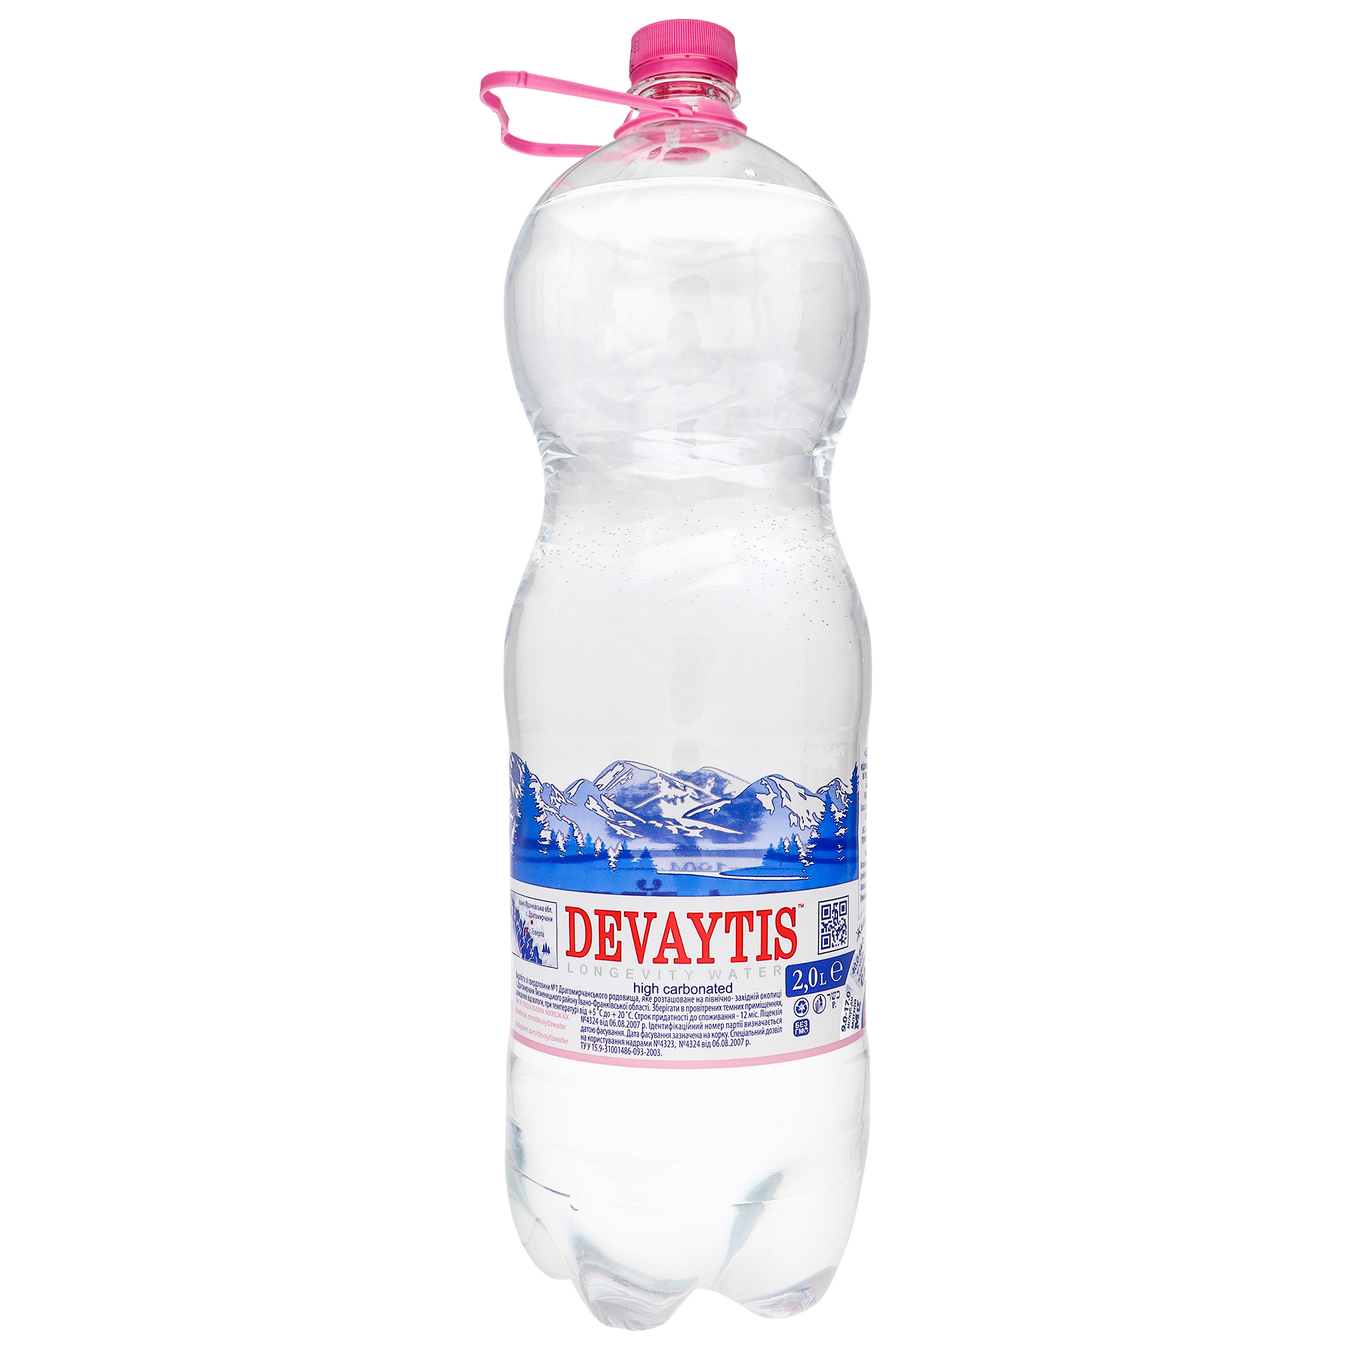 Devaitis strongly carbonated water 2liters 4